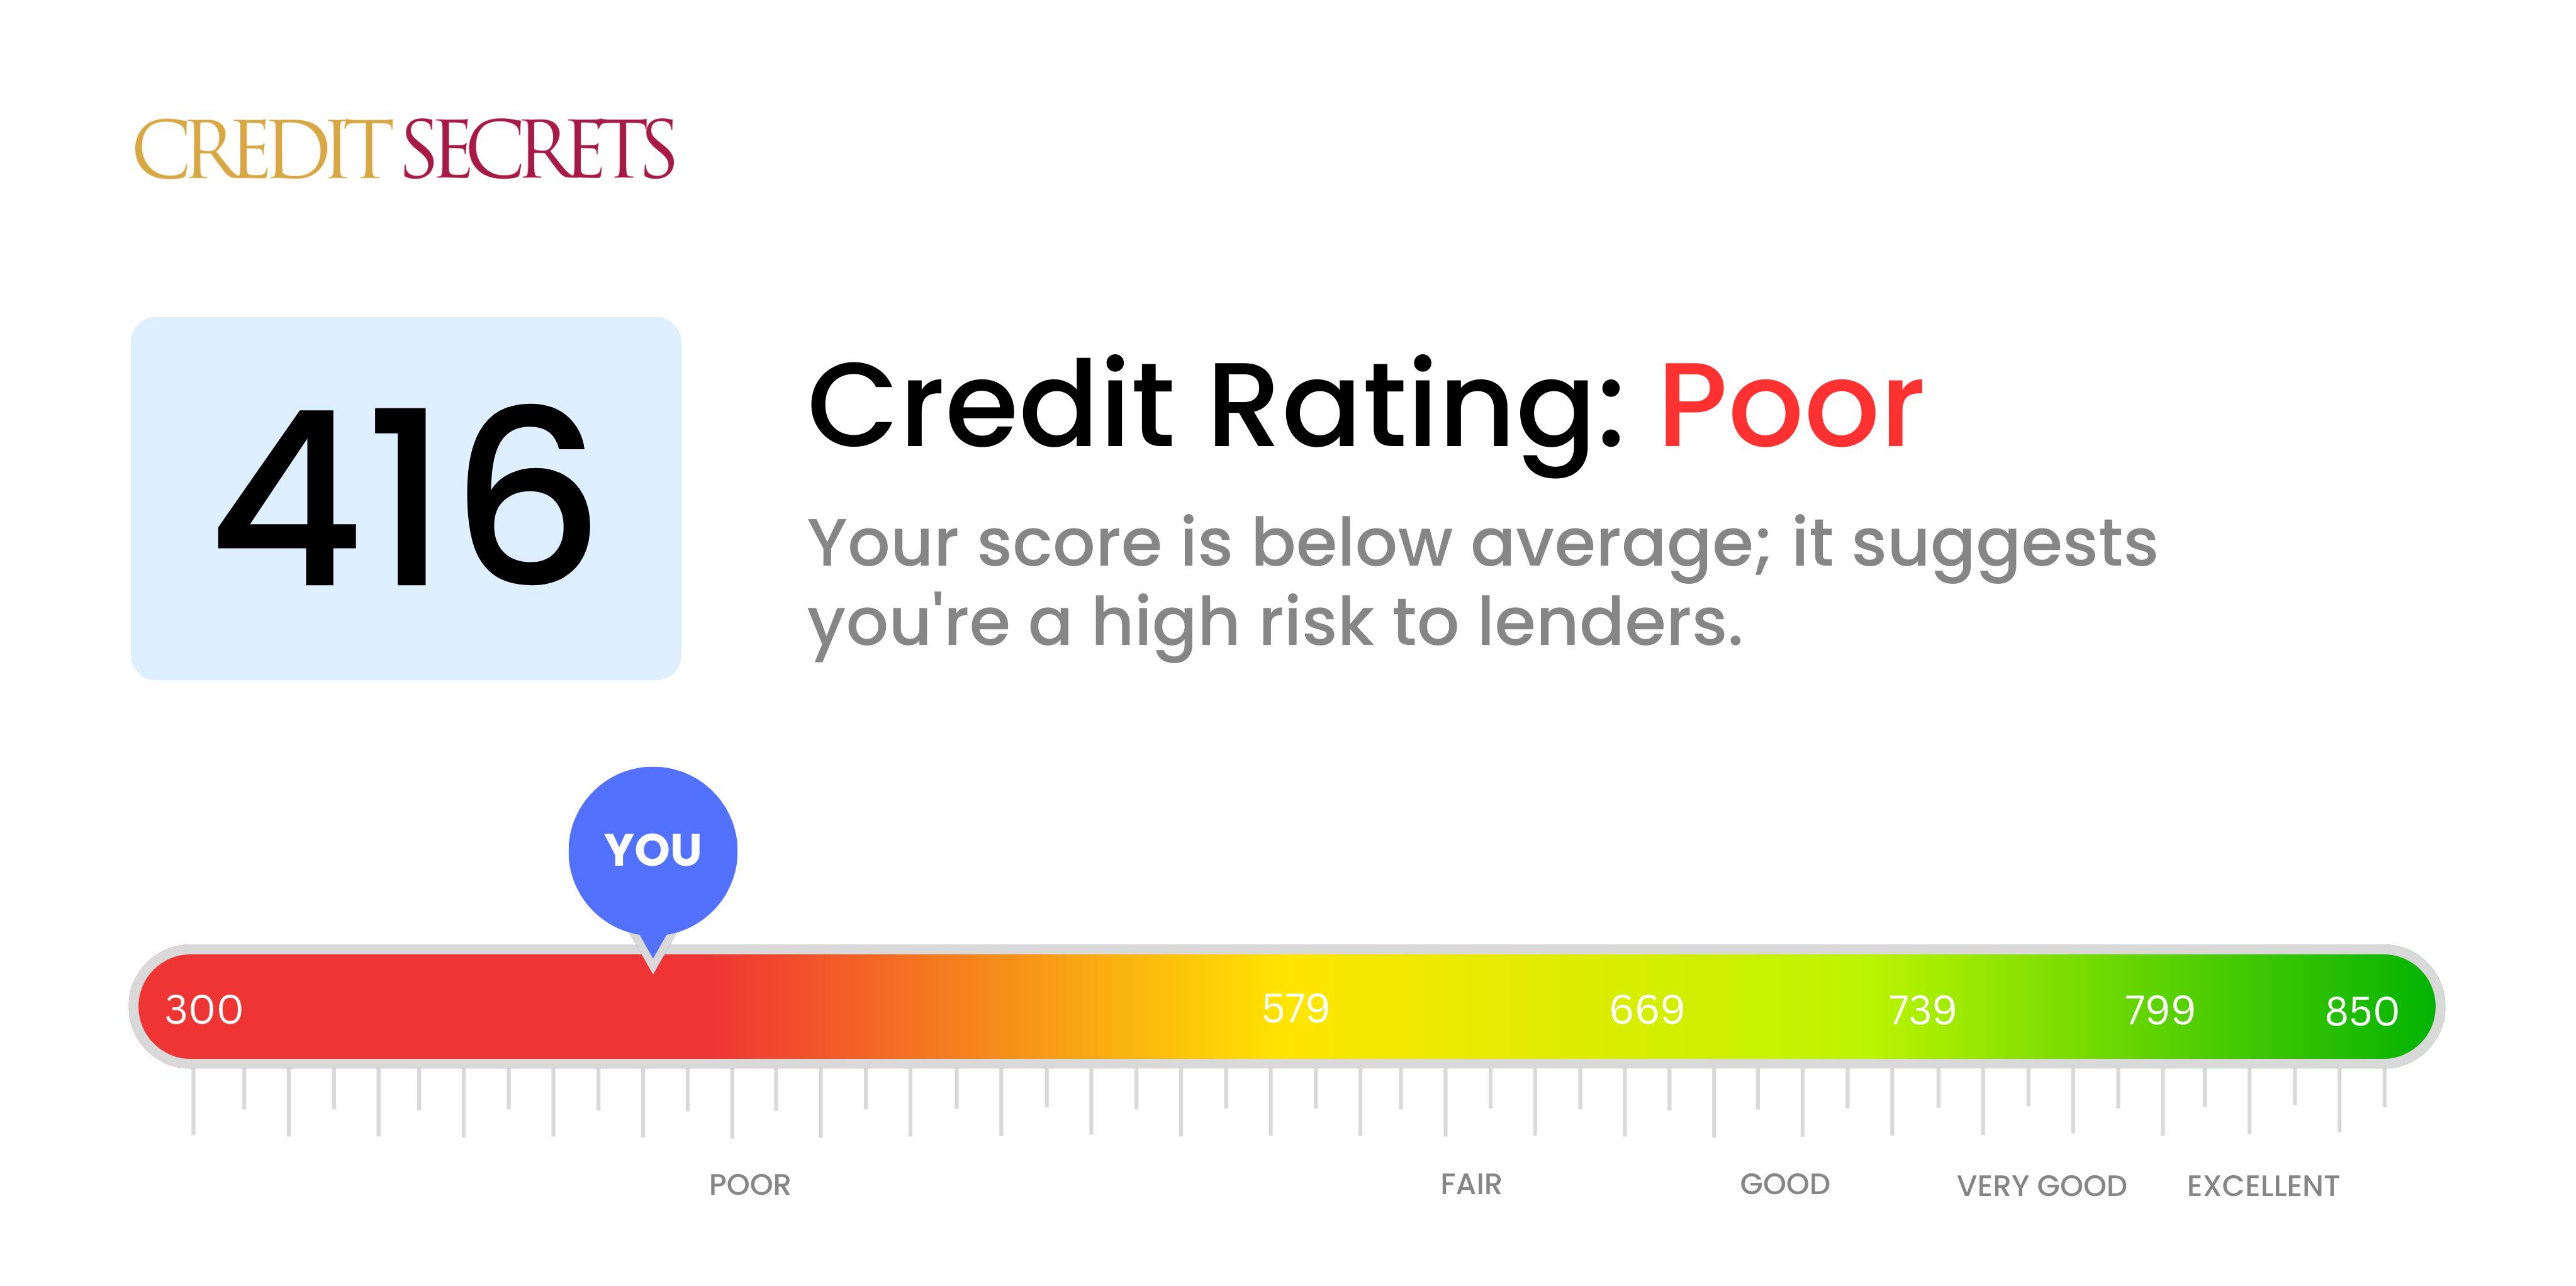 Is 416 a good credit score?